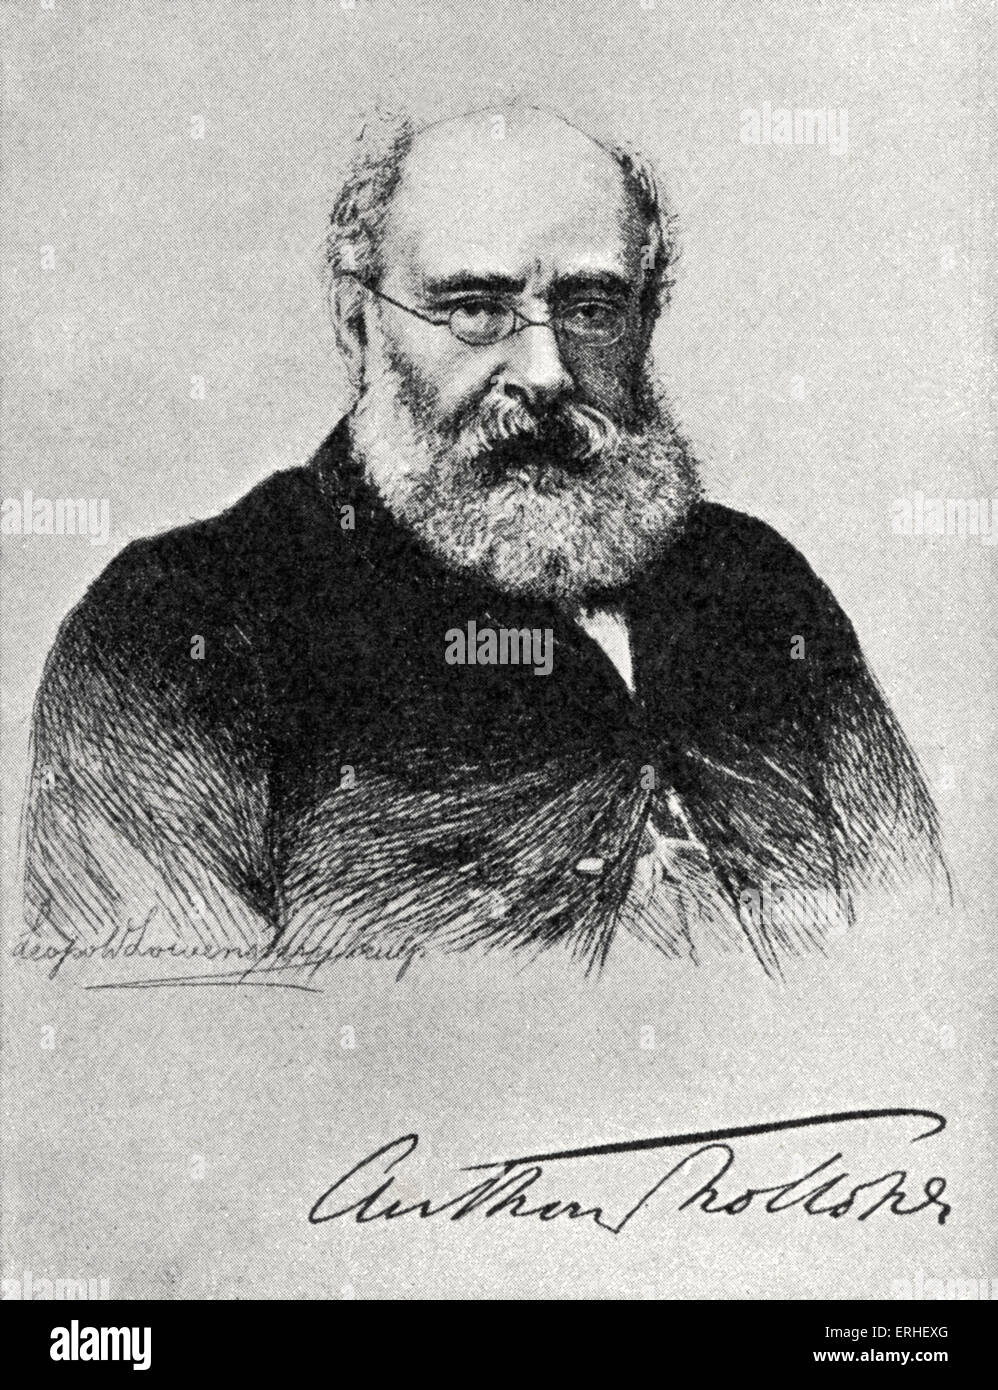 Anthony Trollope - portrait of the English novelist 1815-1882.  From drawing by L. Lowenstam Stock Photo